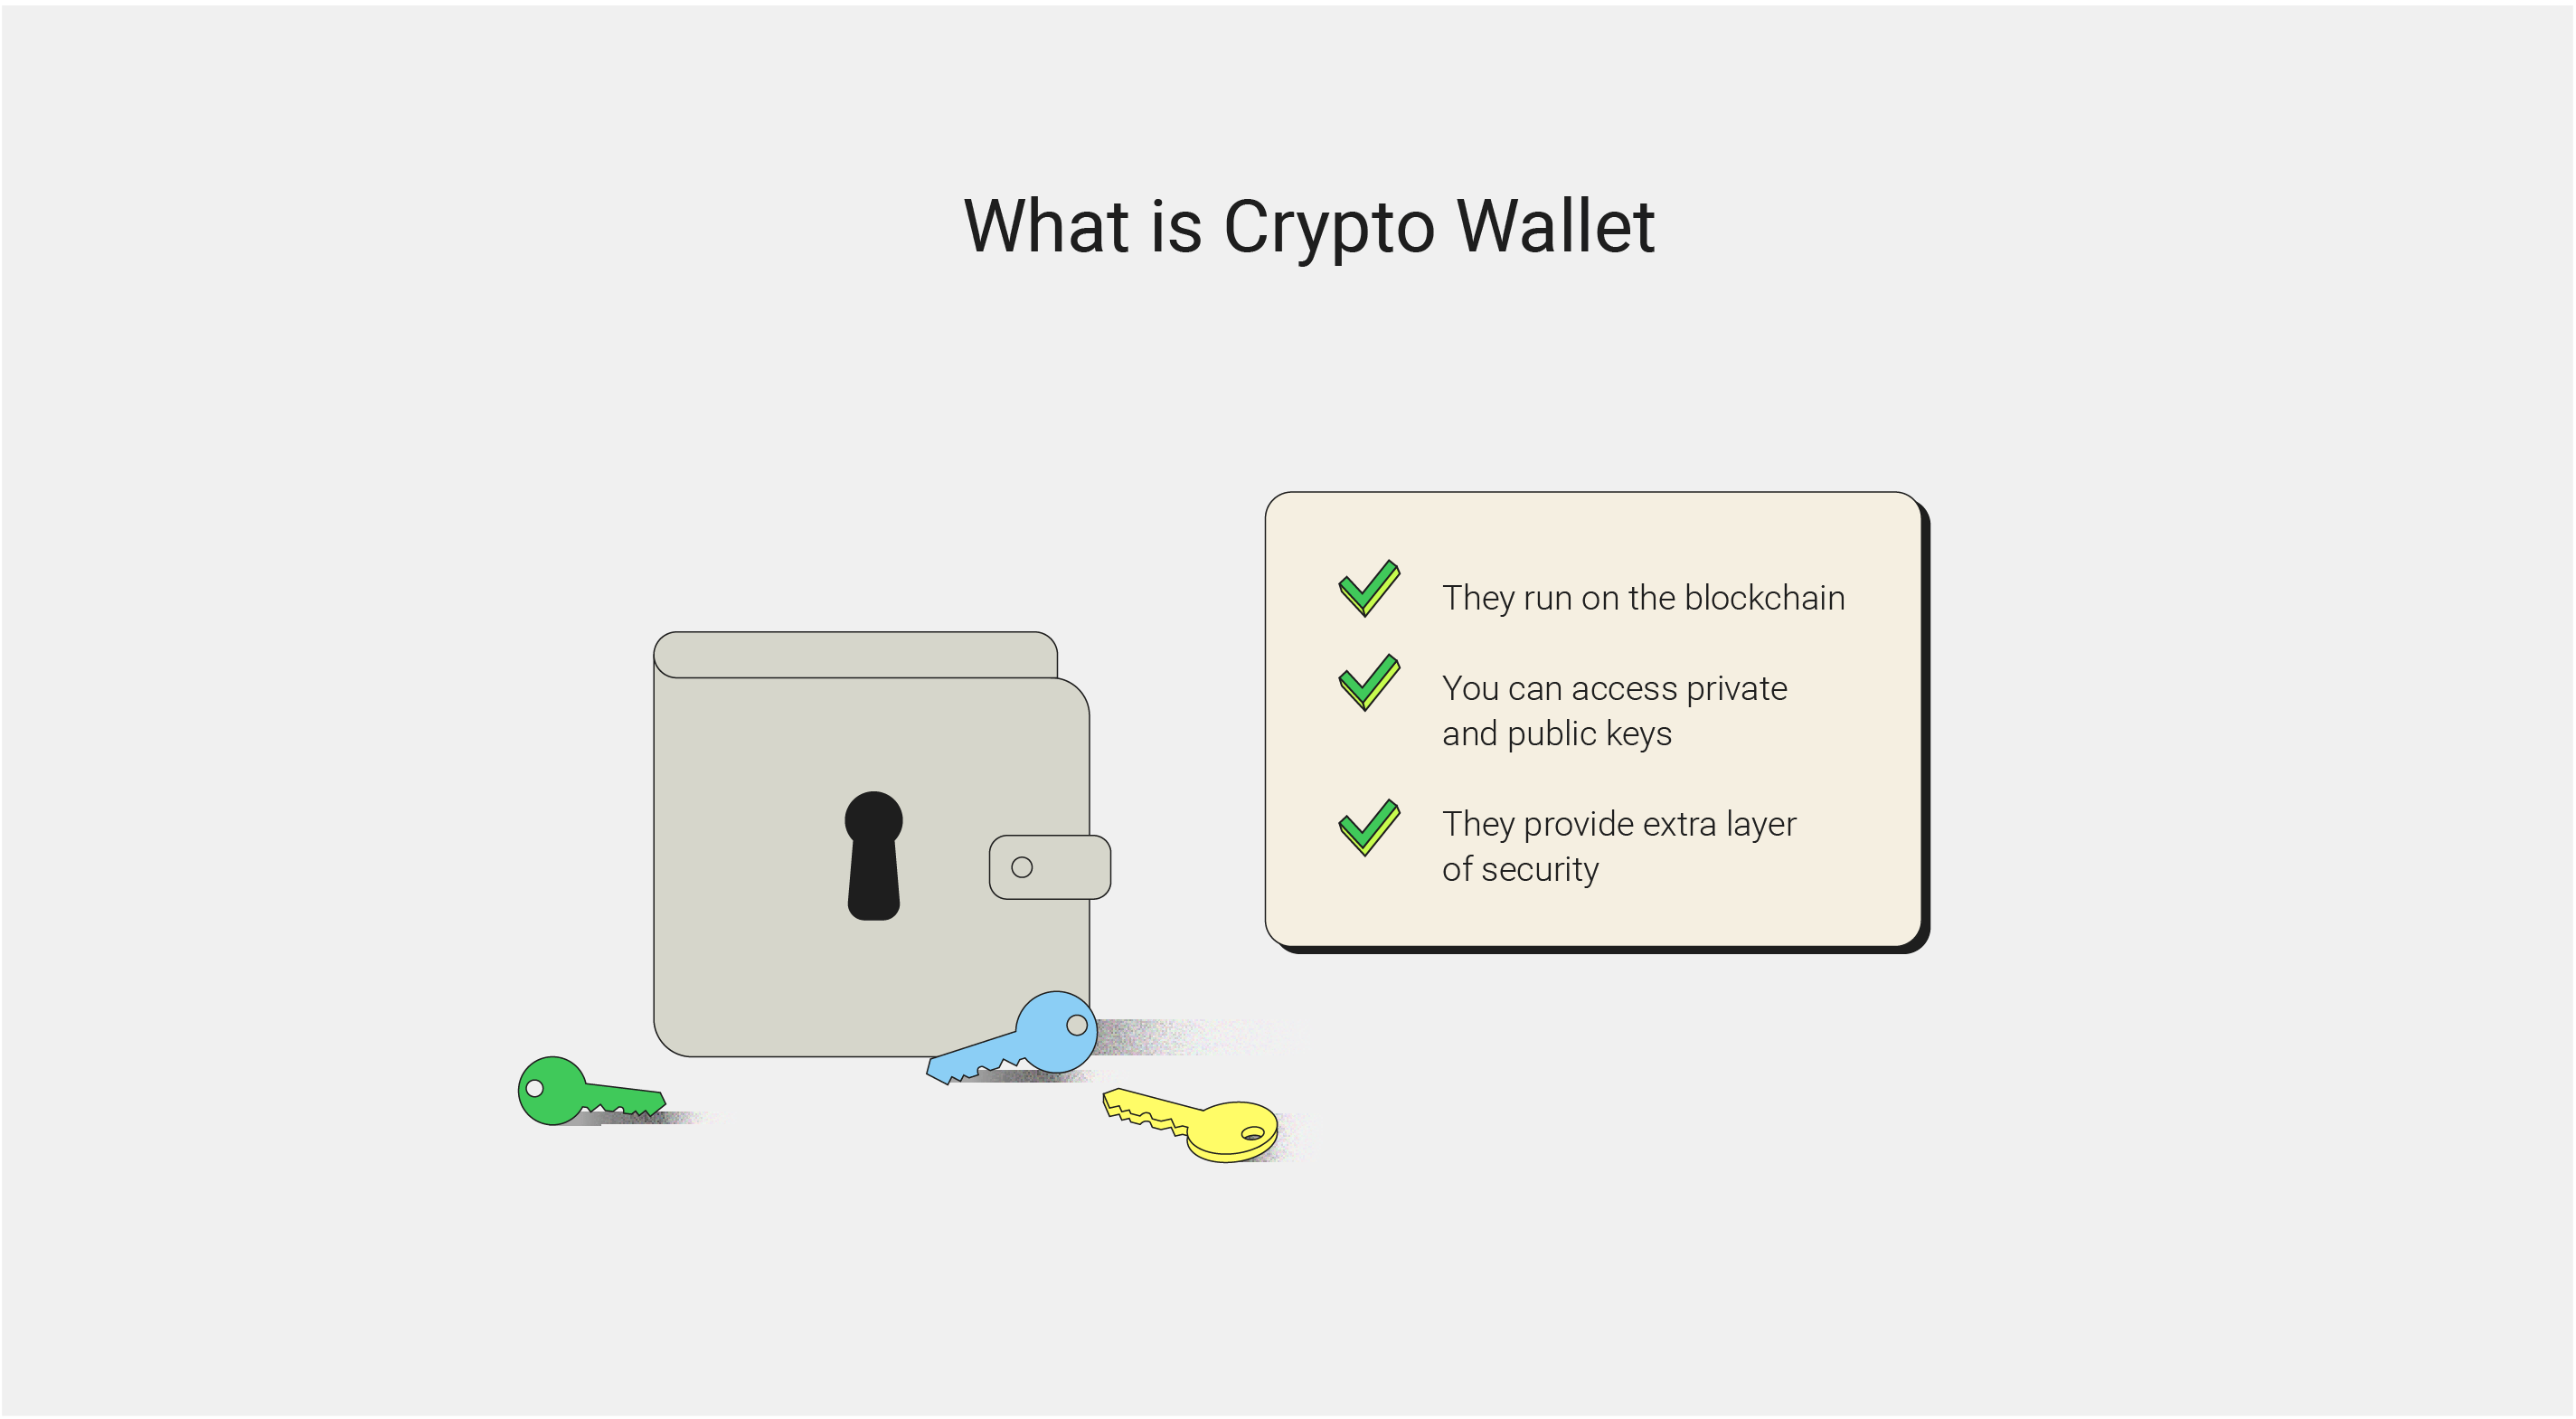 What is Crypto Wallet